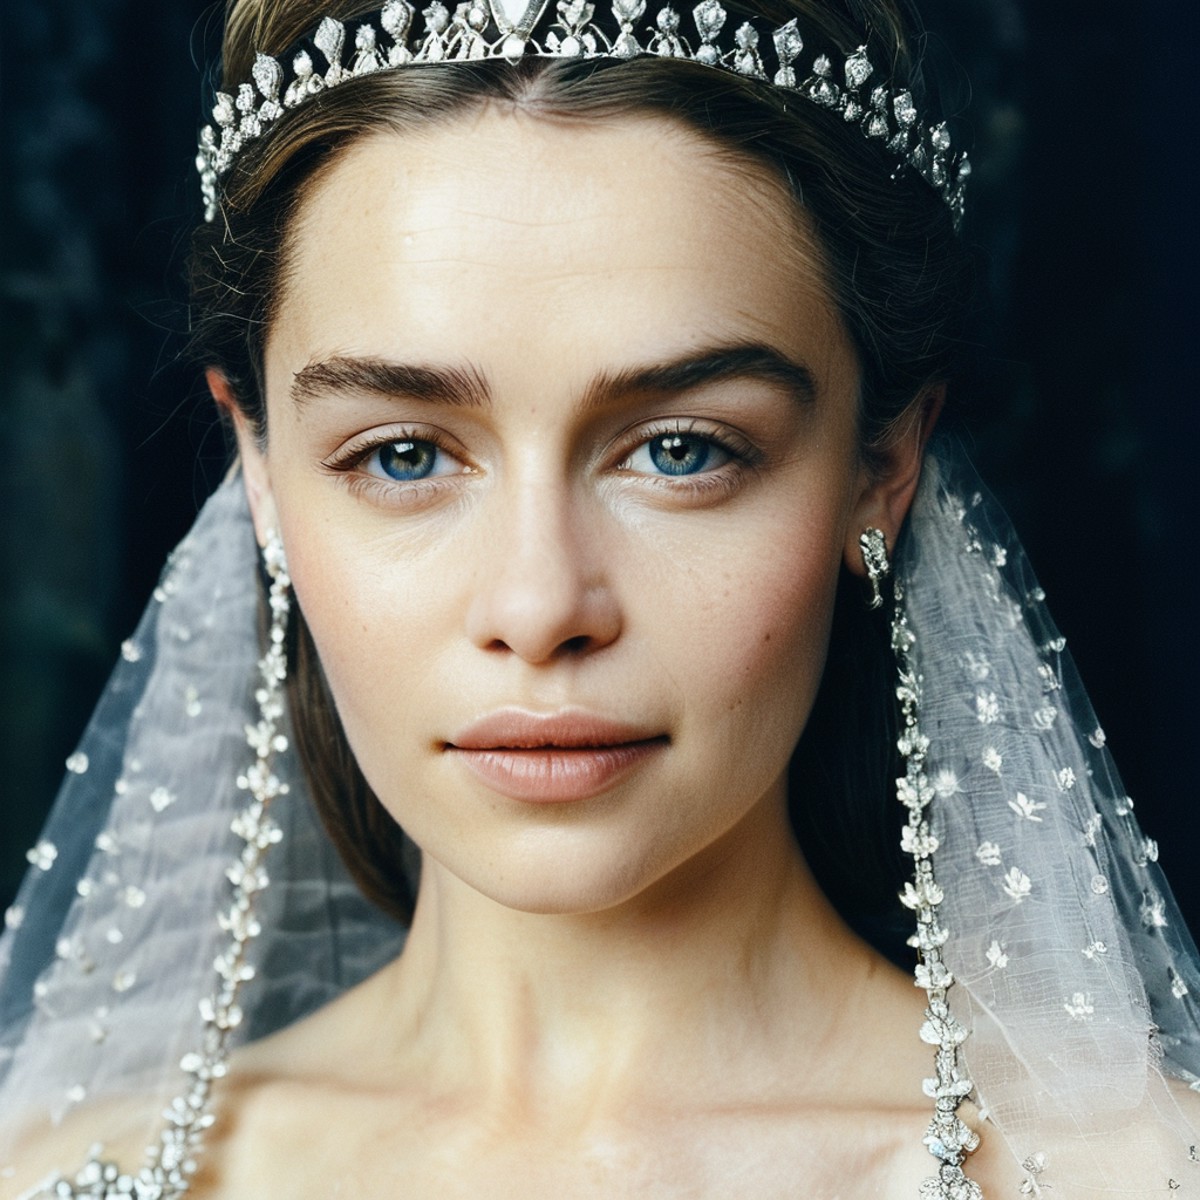 (Skin texture),High qualitycloseup face portrait photo, analog, film grain, actress dressed as a medieval queen with a del...